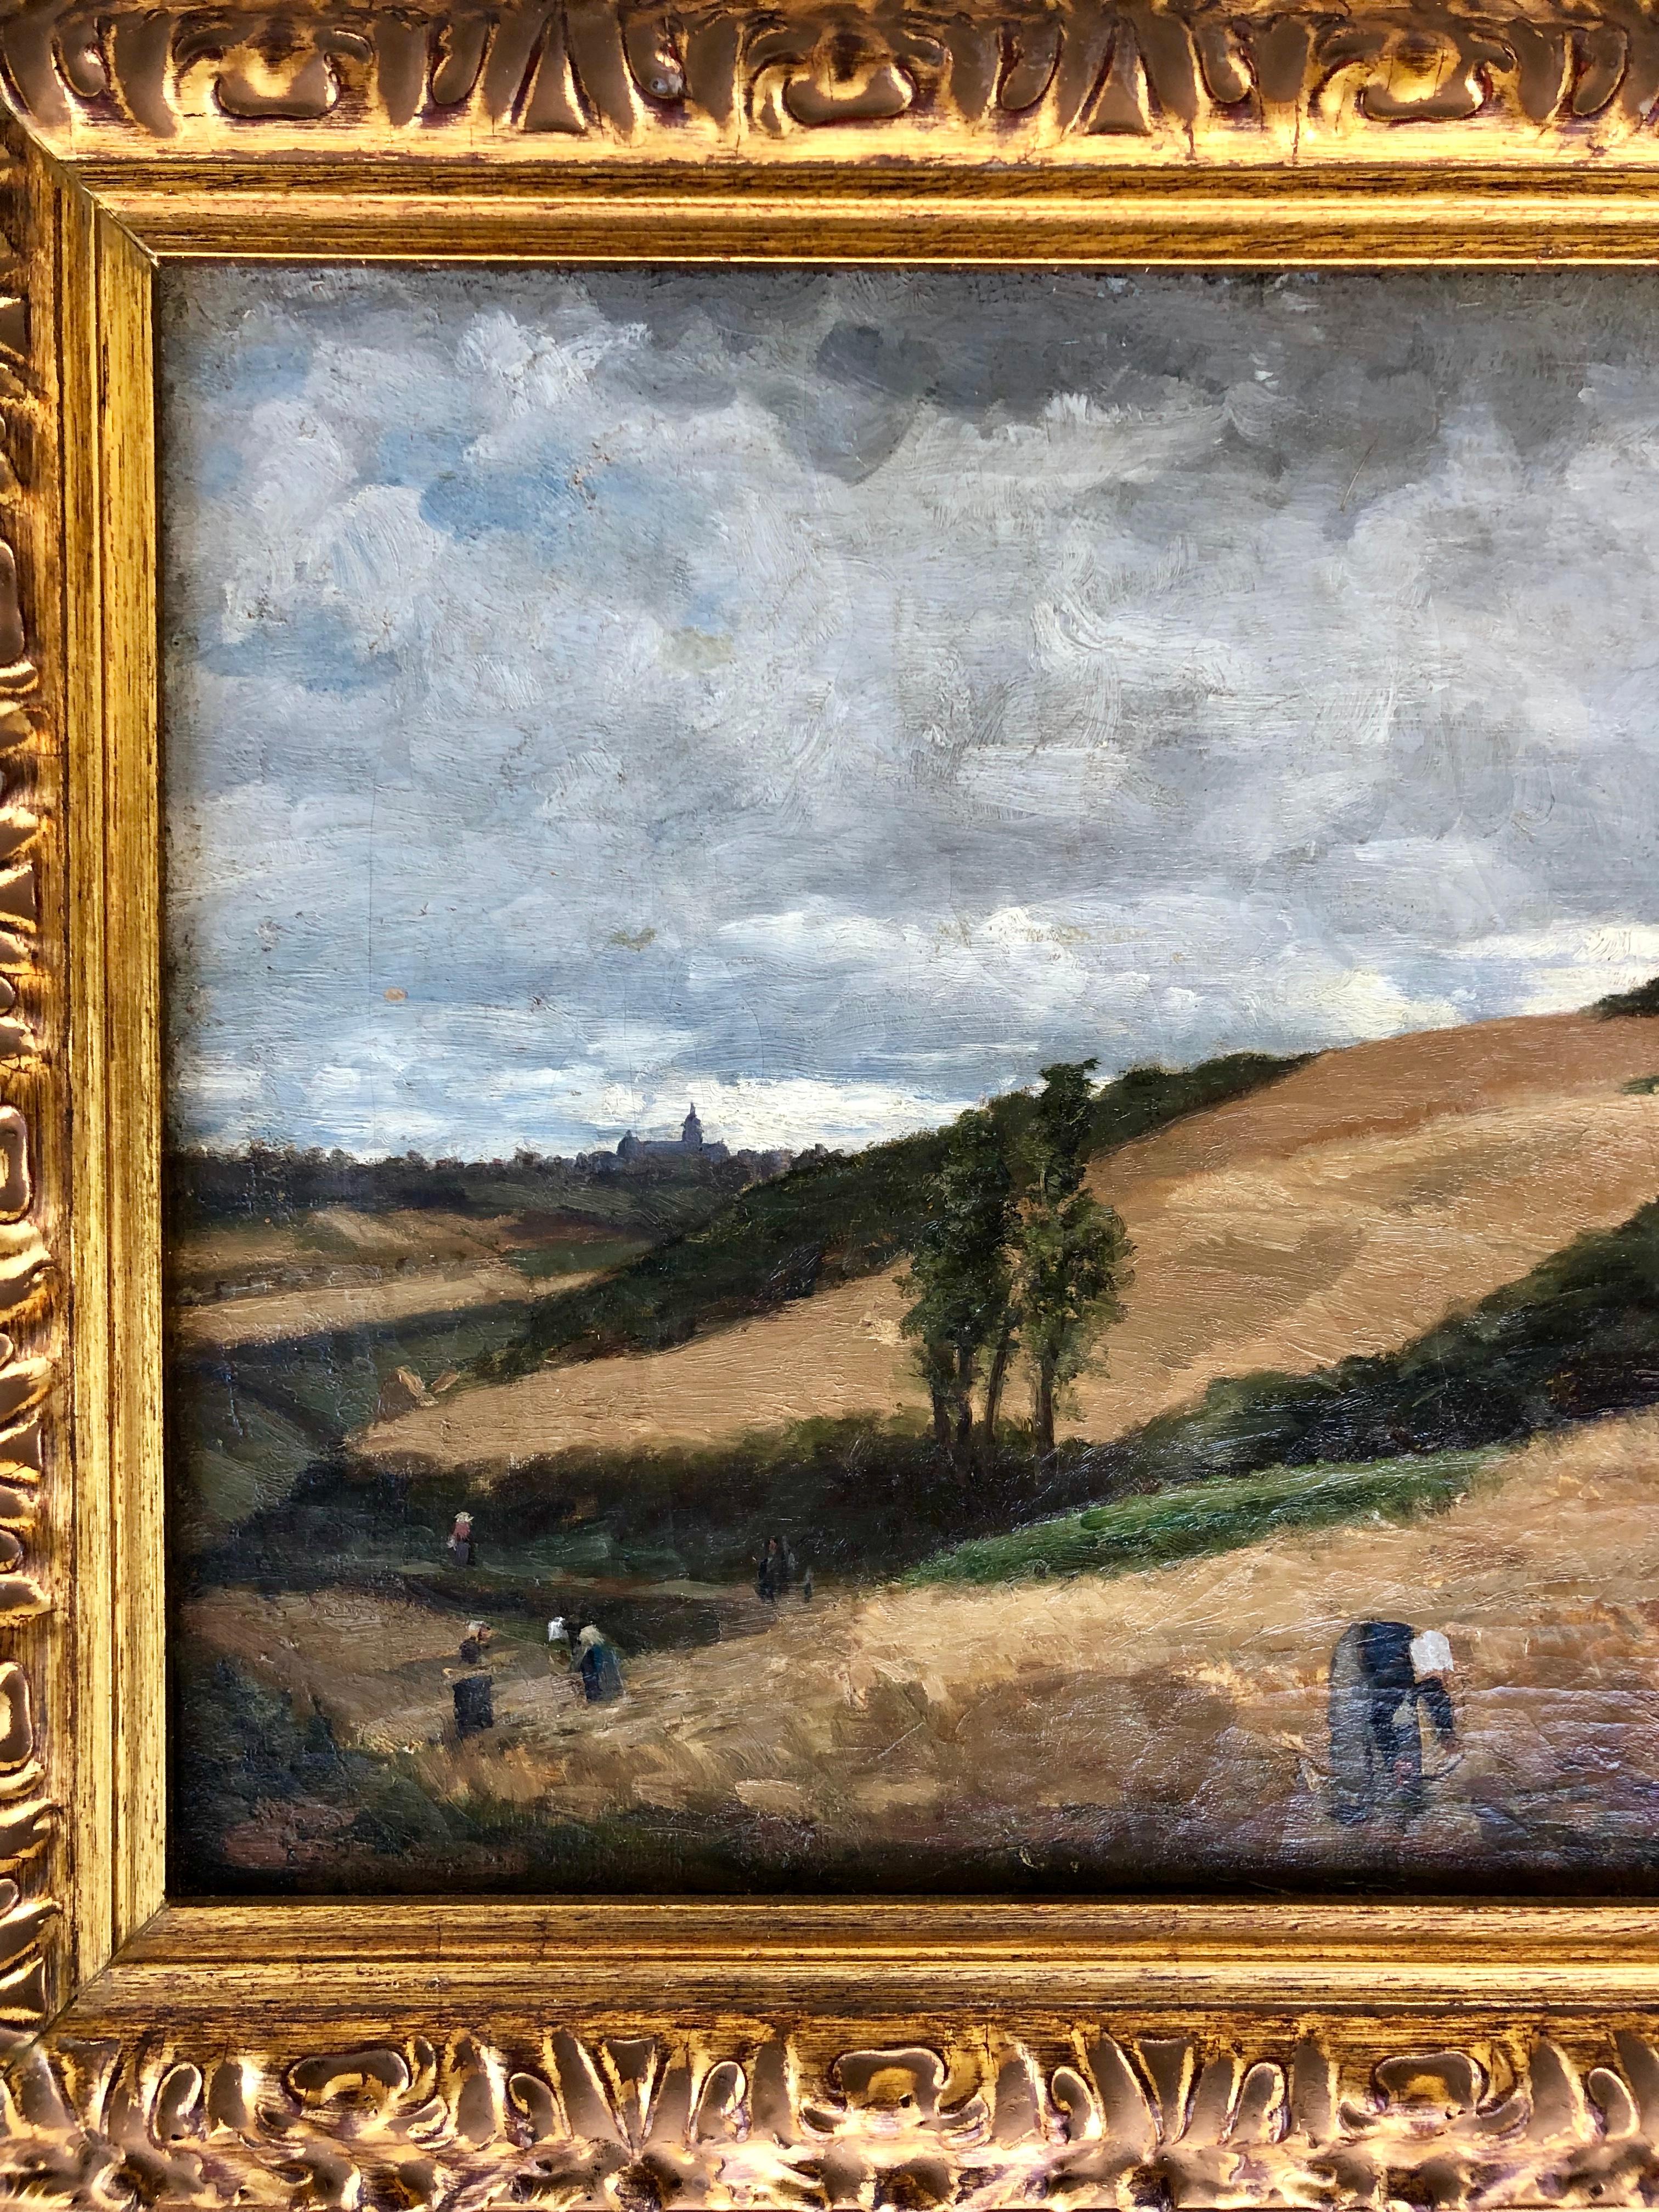 Oil on canvas.
Attached on the back of this painting are the remnants of an original Pennsylvania Academy of Fine Arts label, with inscriptions as follows: 